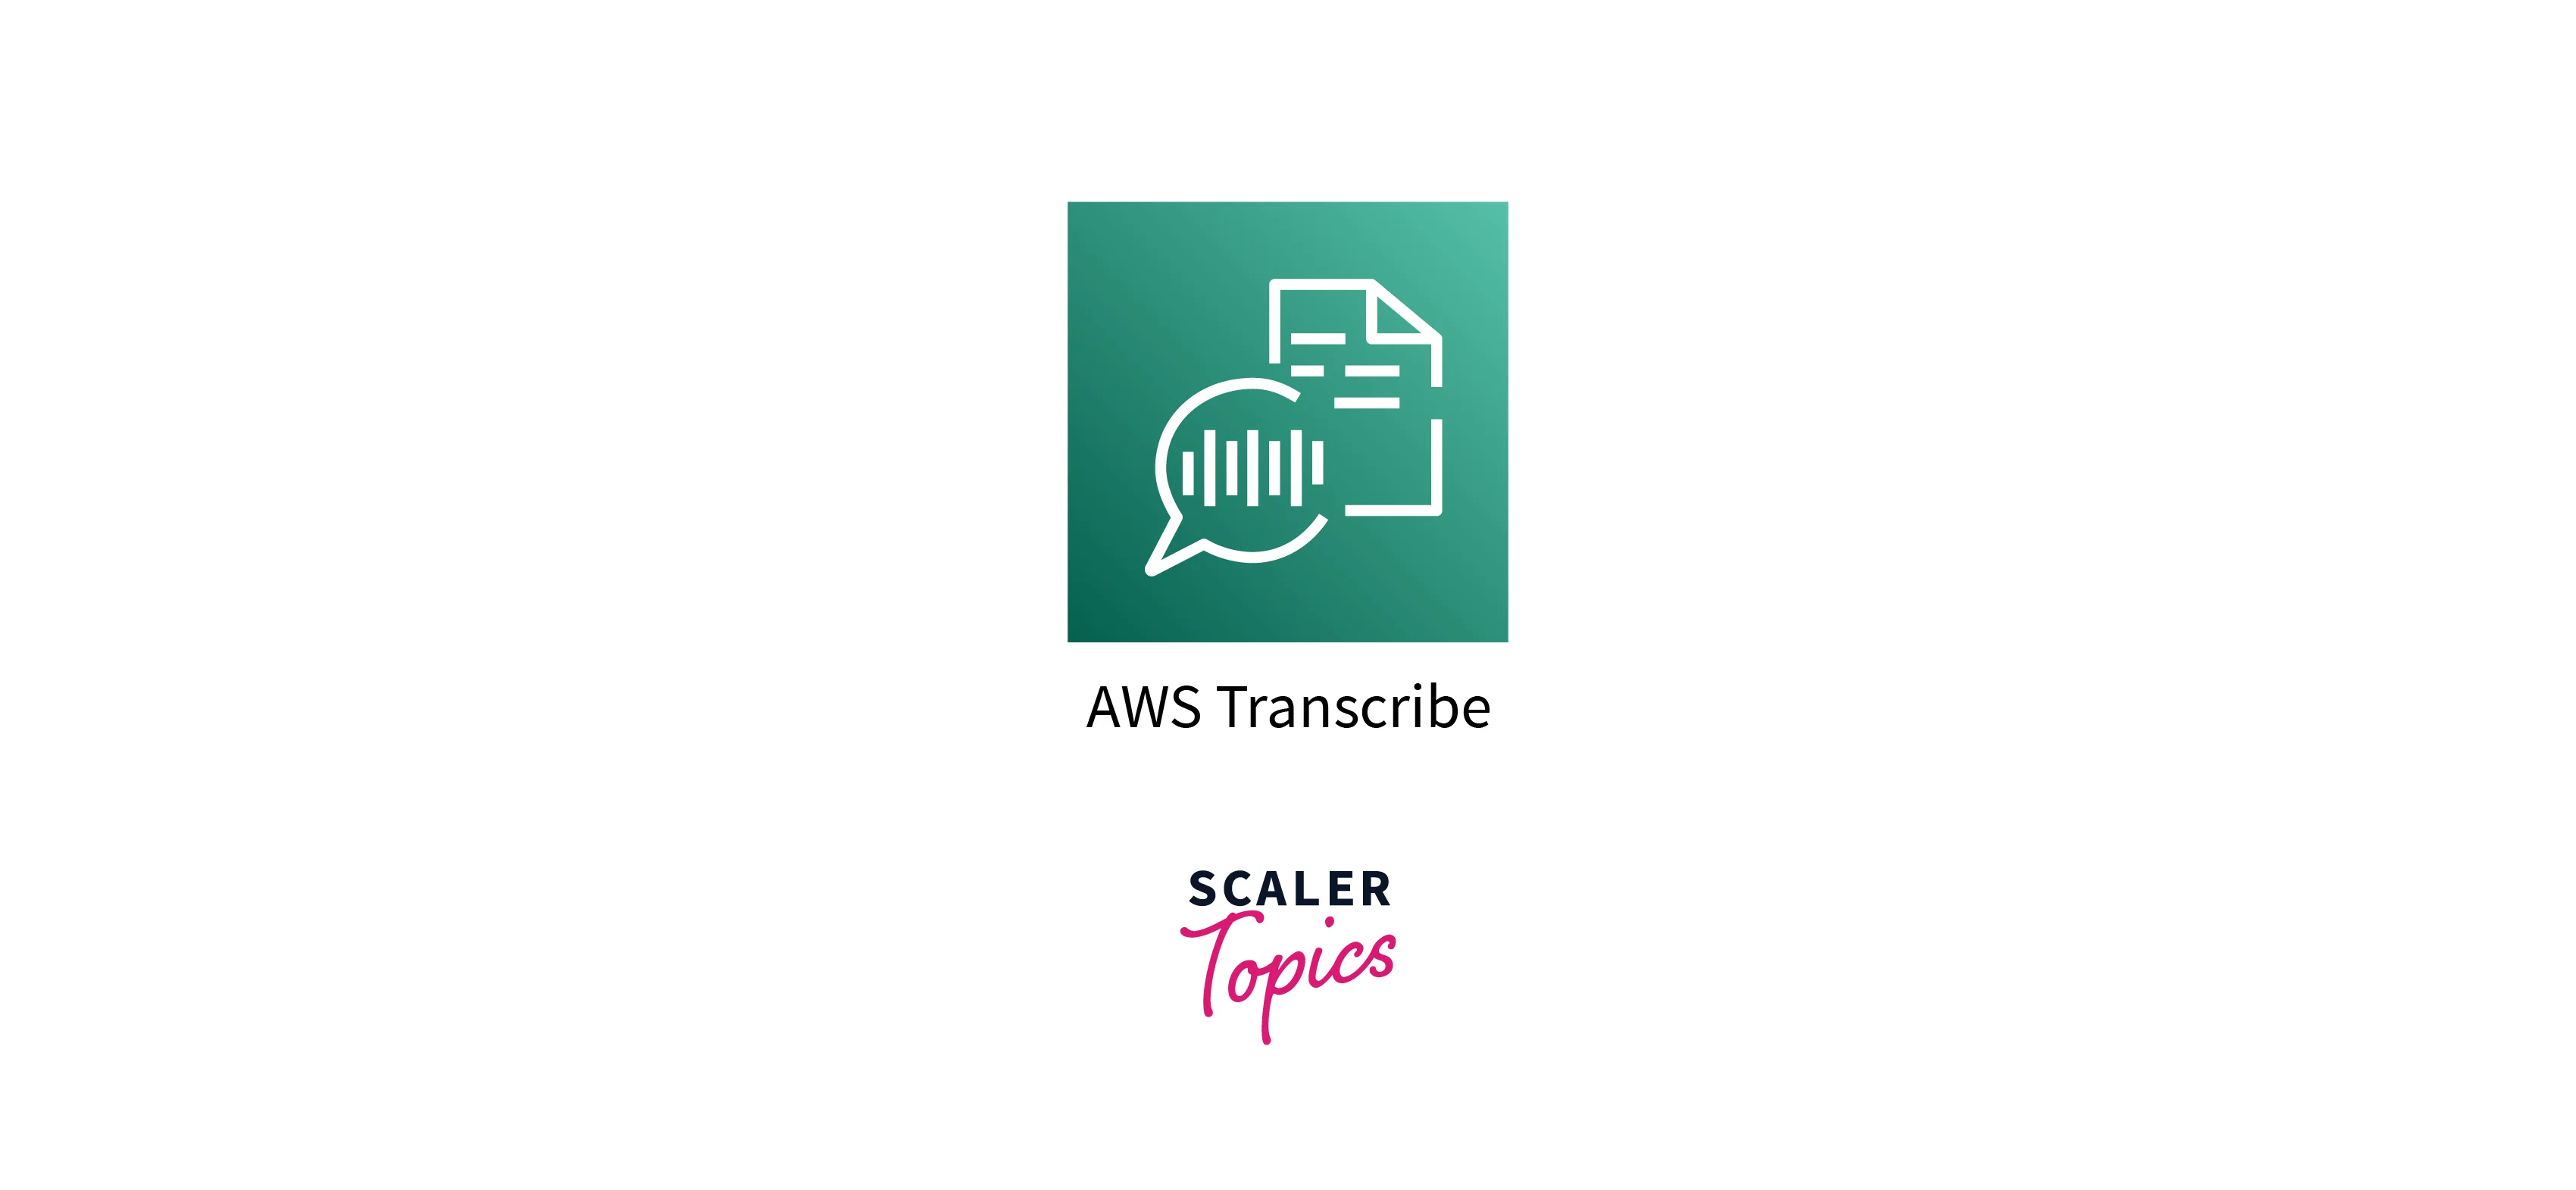 Introduction to AWS Transcribe